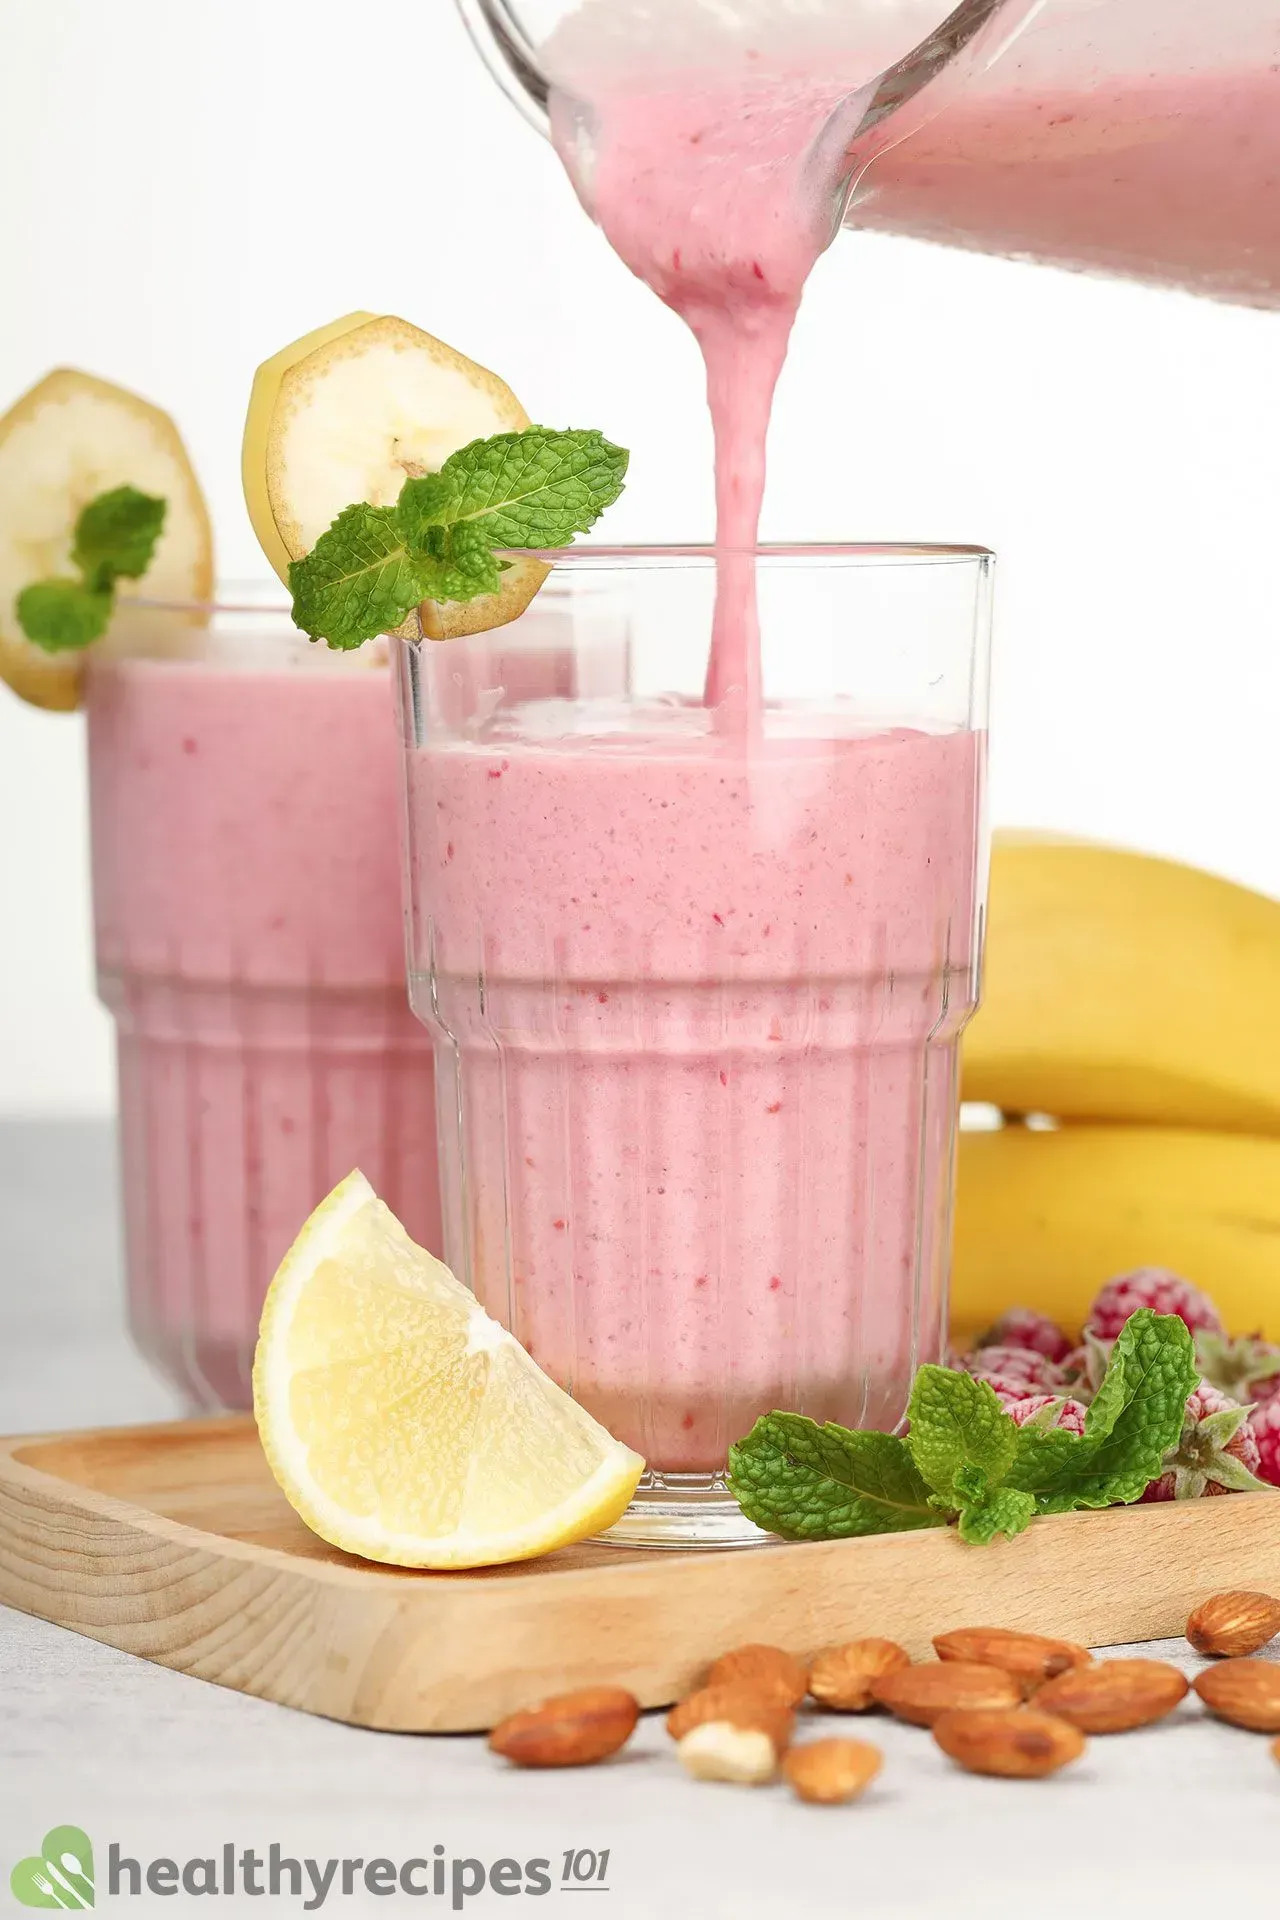 Raspberry Banana Smoothie Recipe - Beautiful and Packed With Flavor